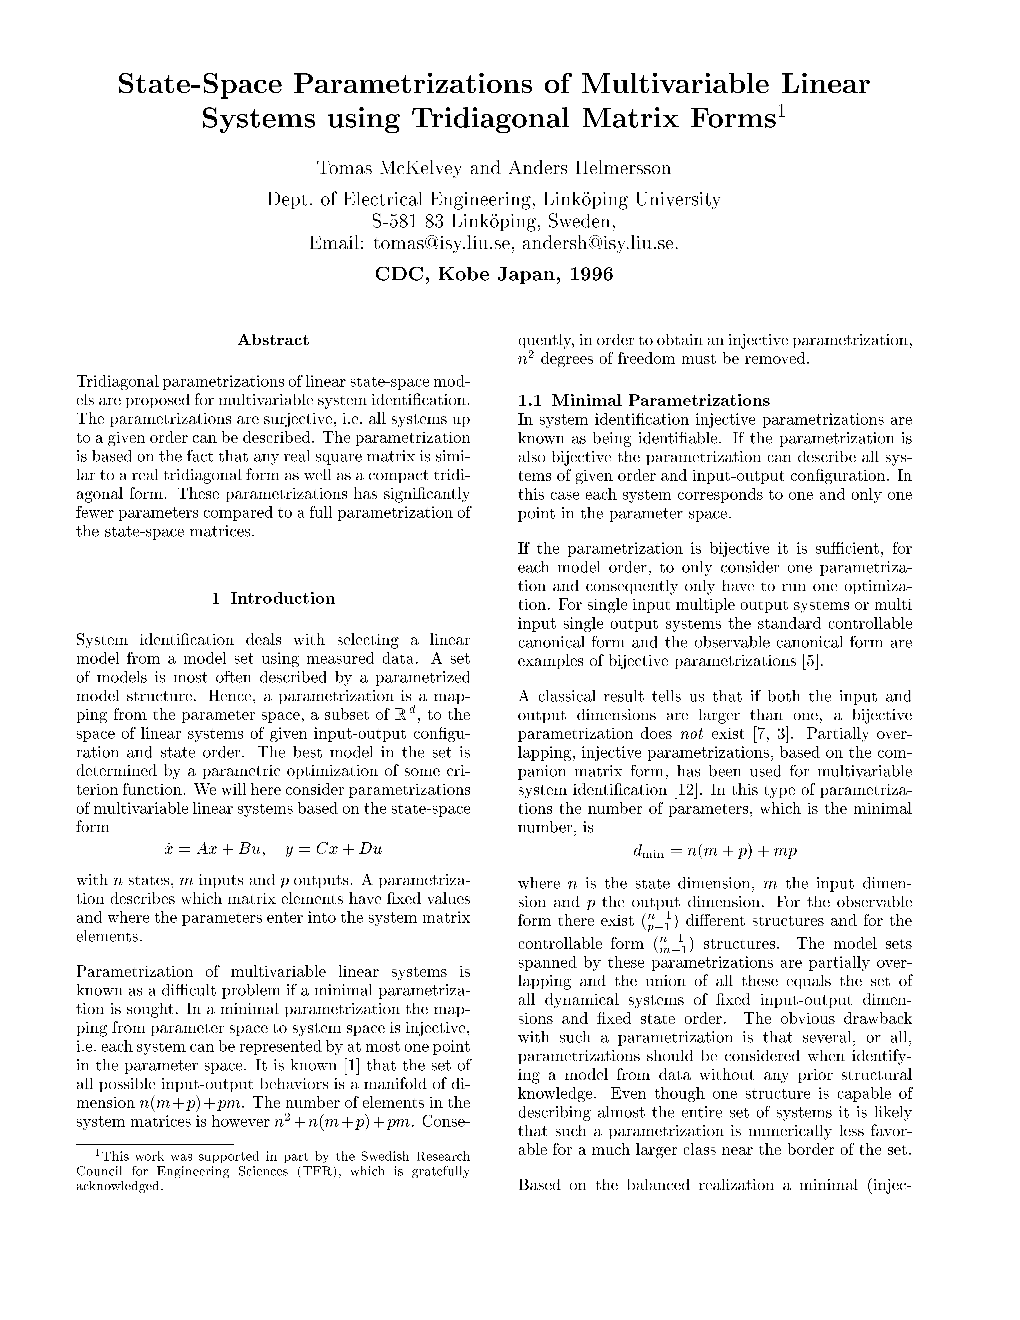 State-Space Parametrizations of Multivariable Linear Systems Using